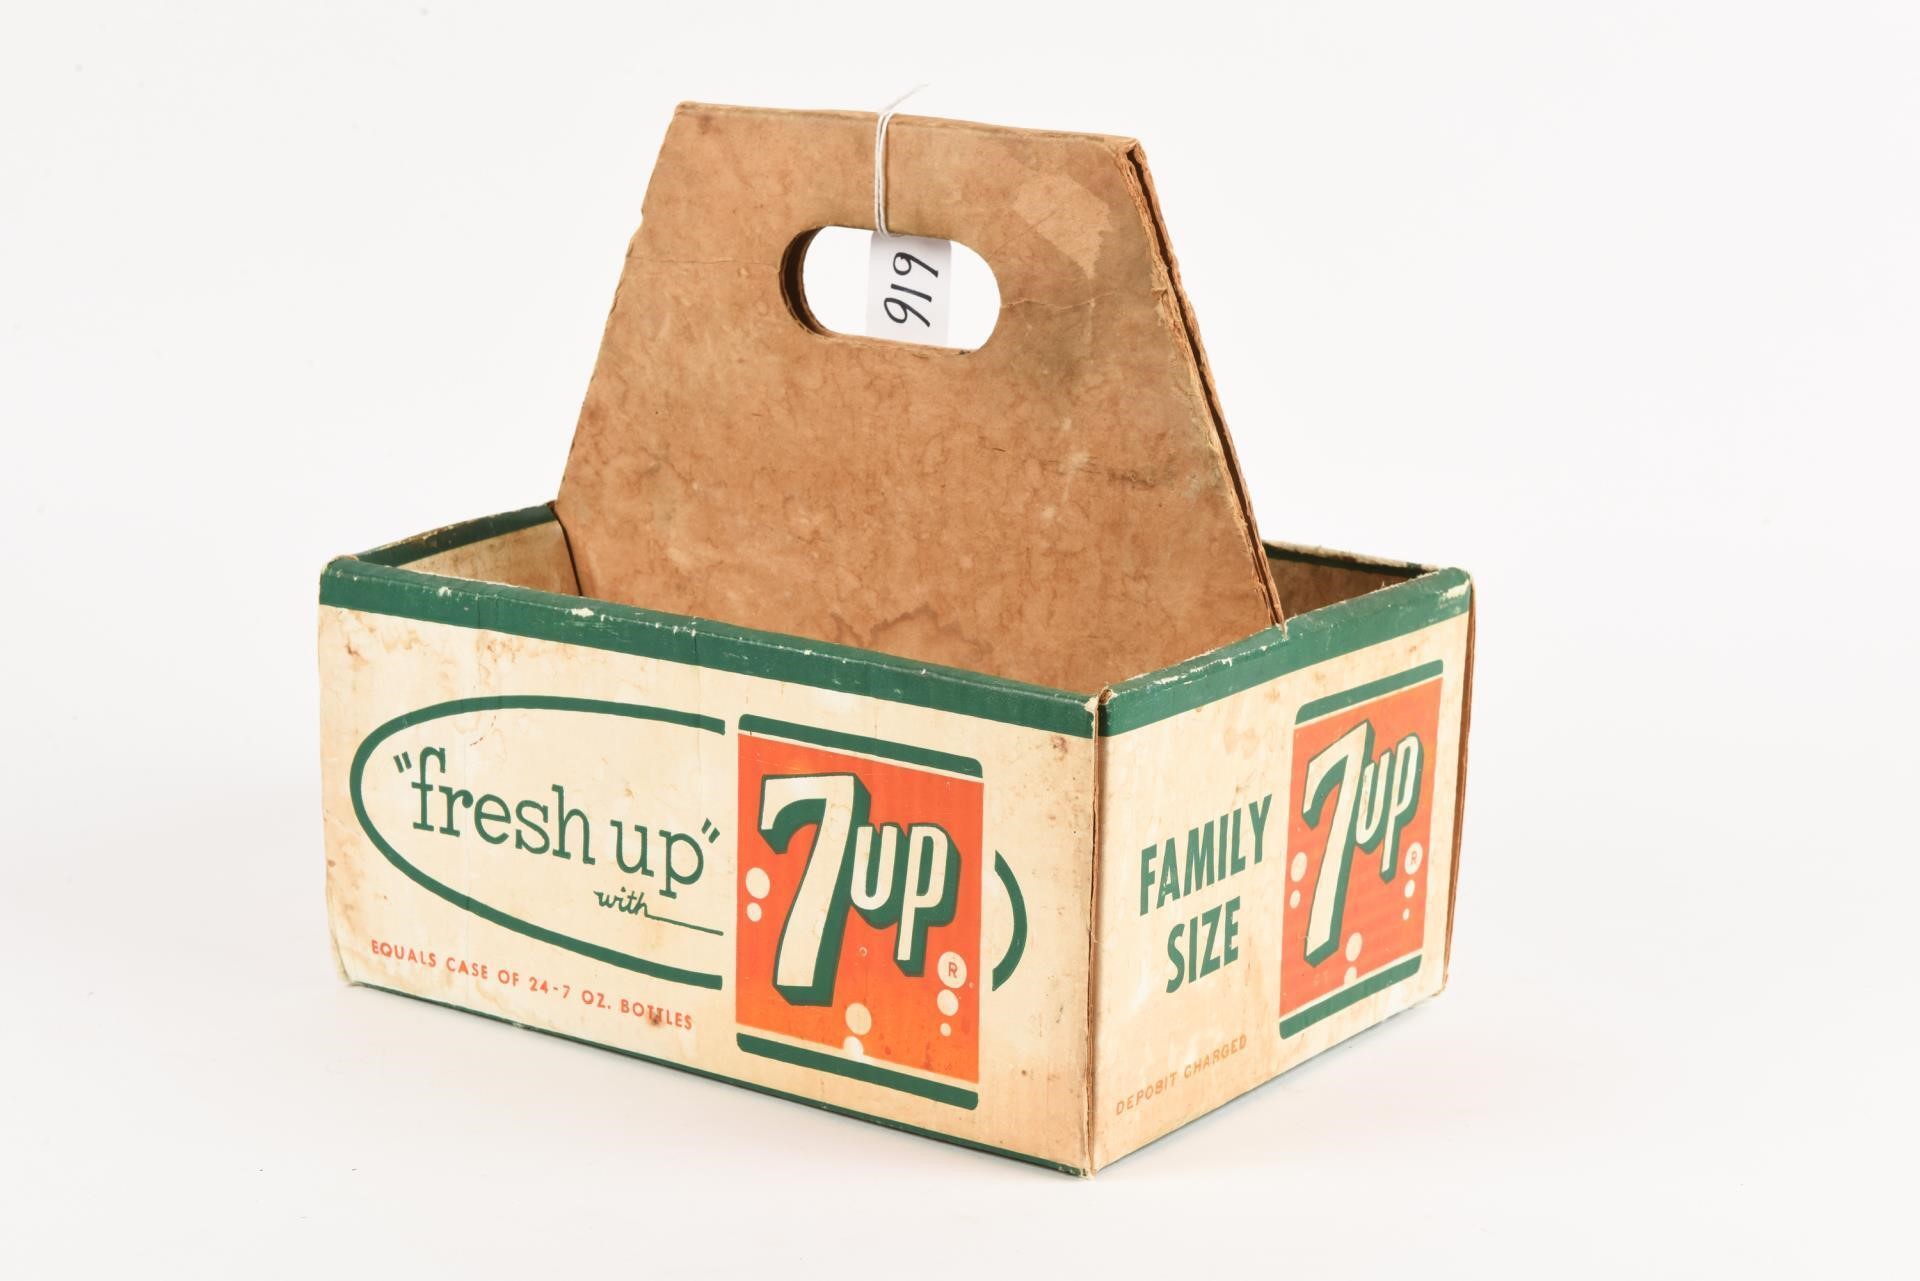 "FRESH UP" WITH 7UP FAMILY SIZE CARTON CARRIER